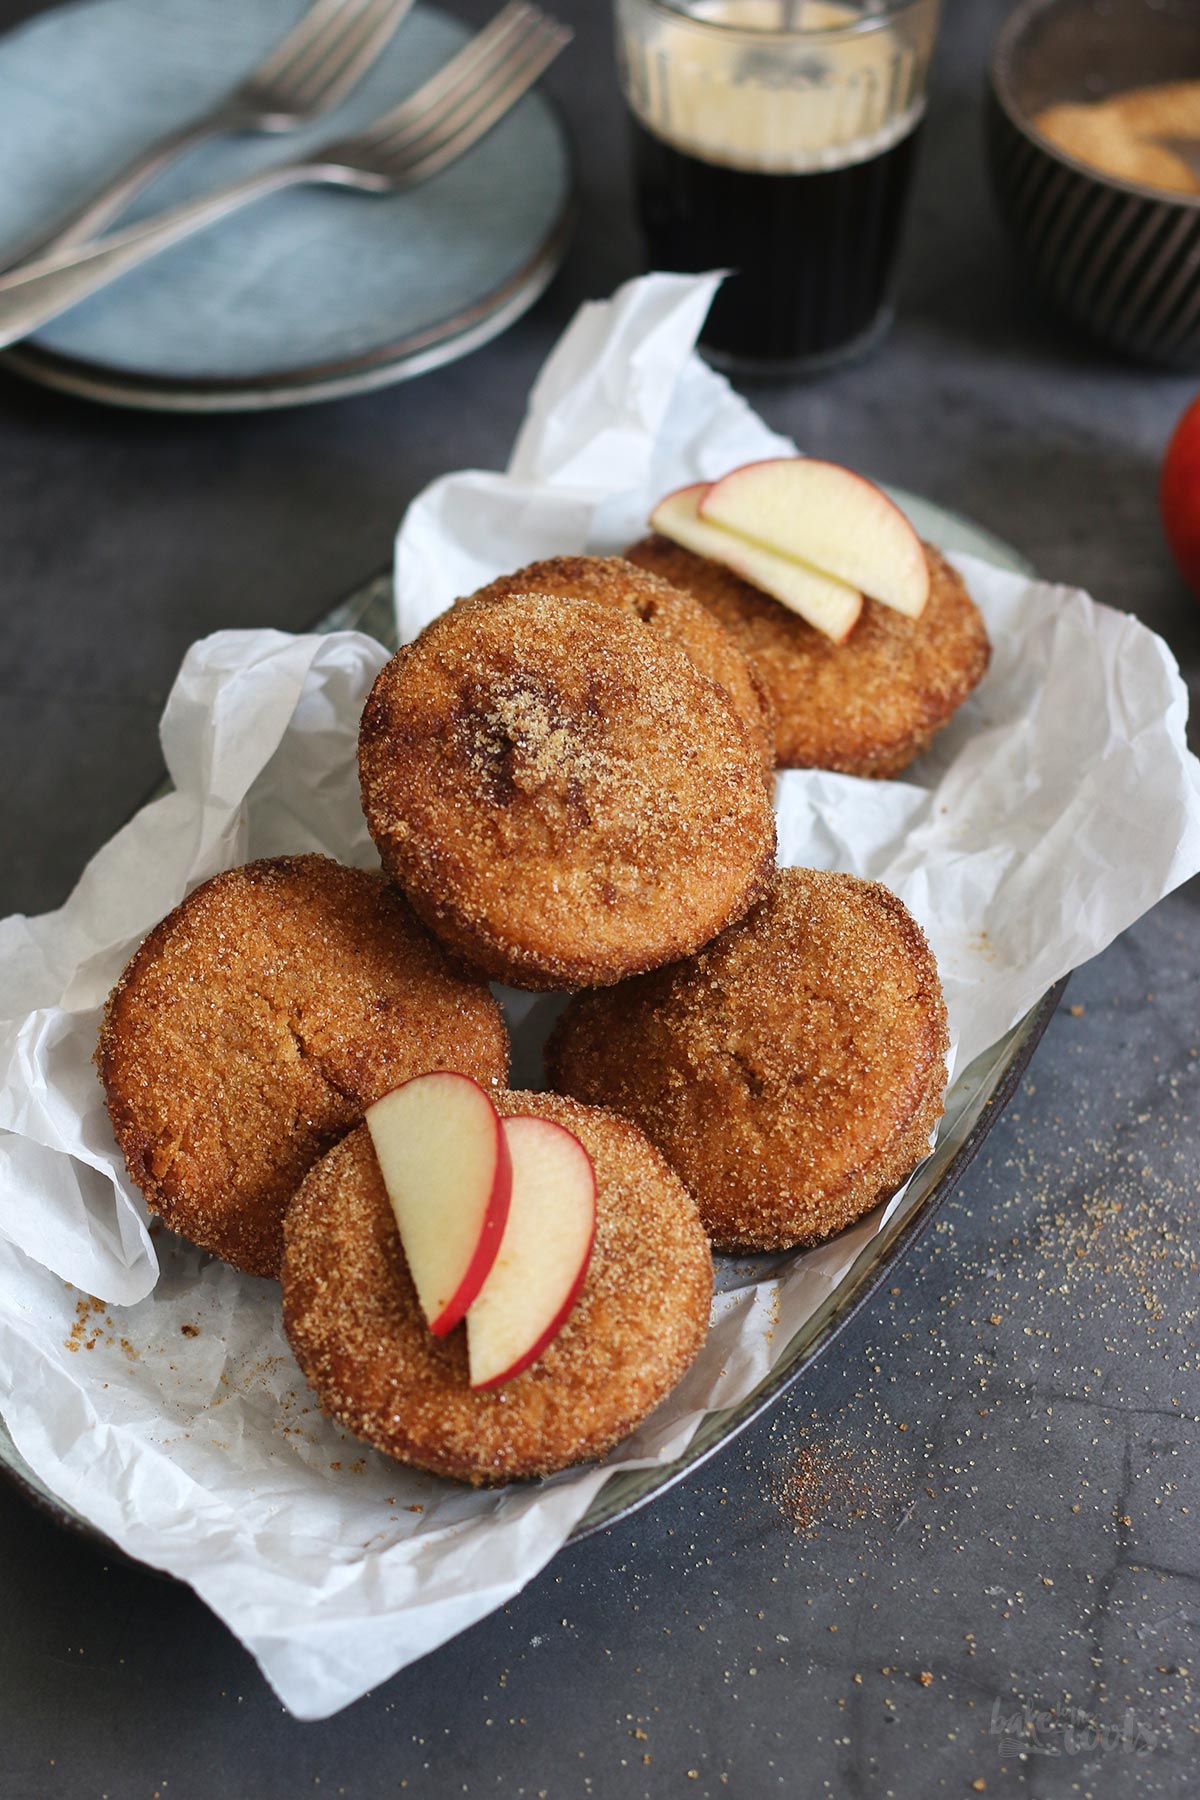 Einfache Apple Cider Muffins | Bake to the roots